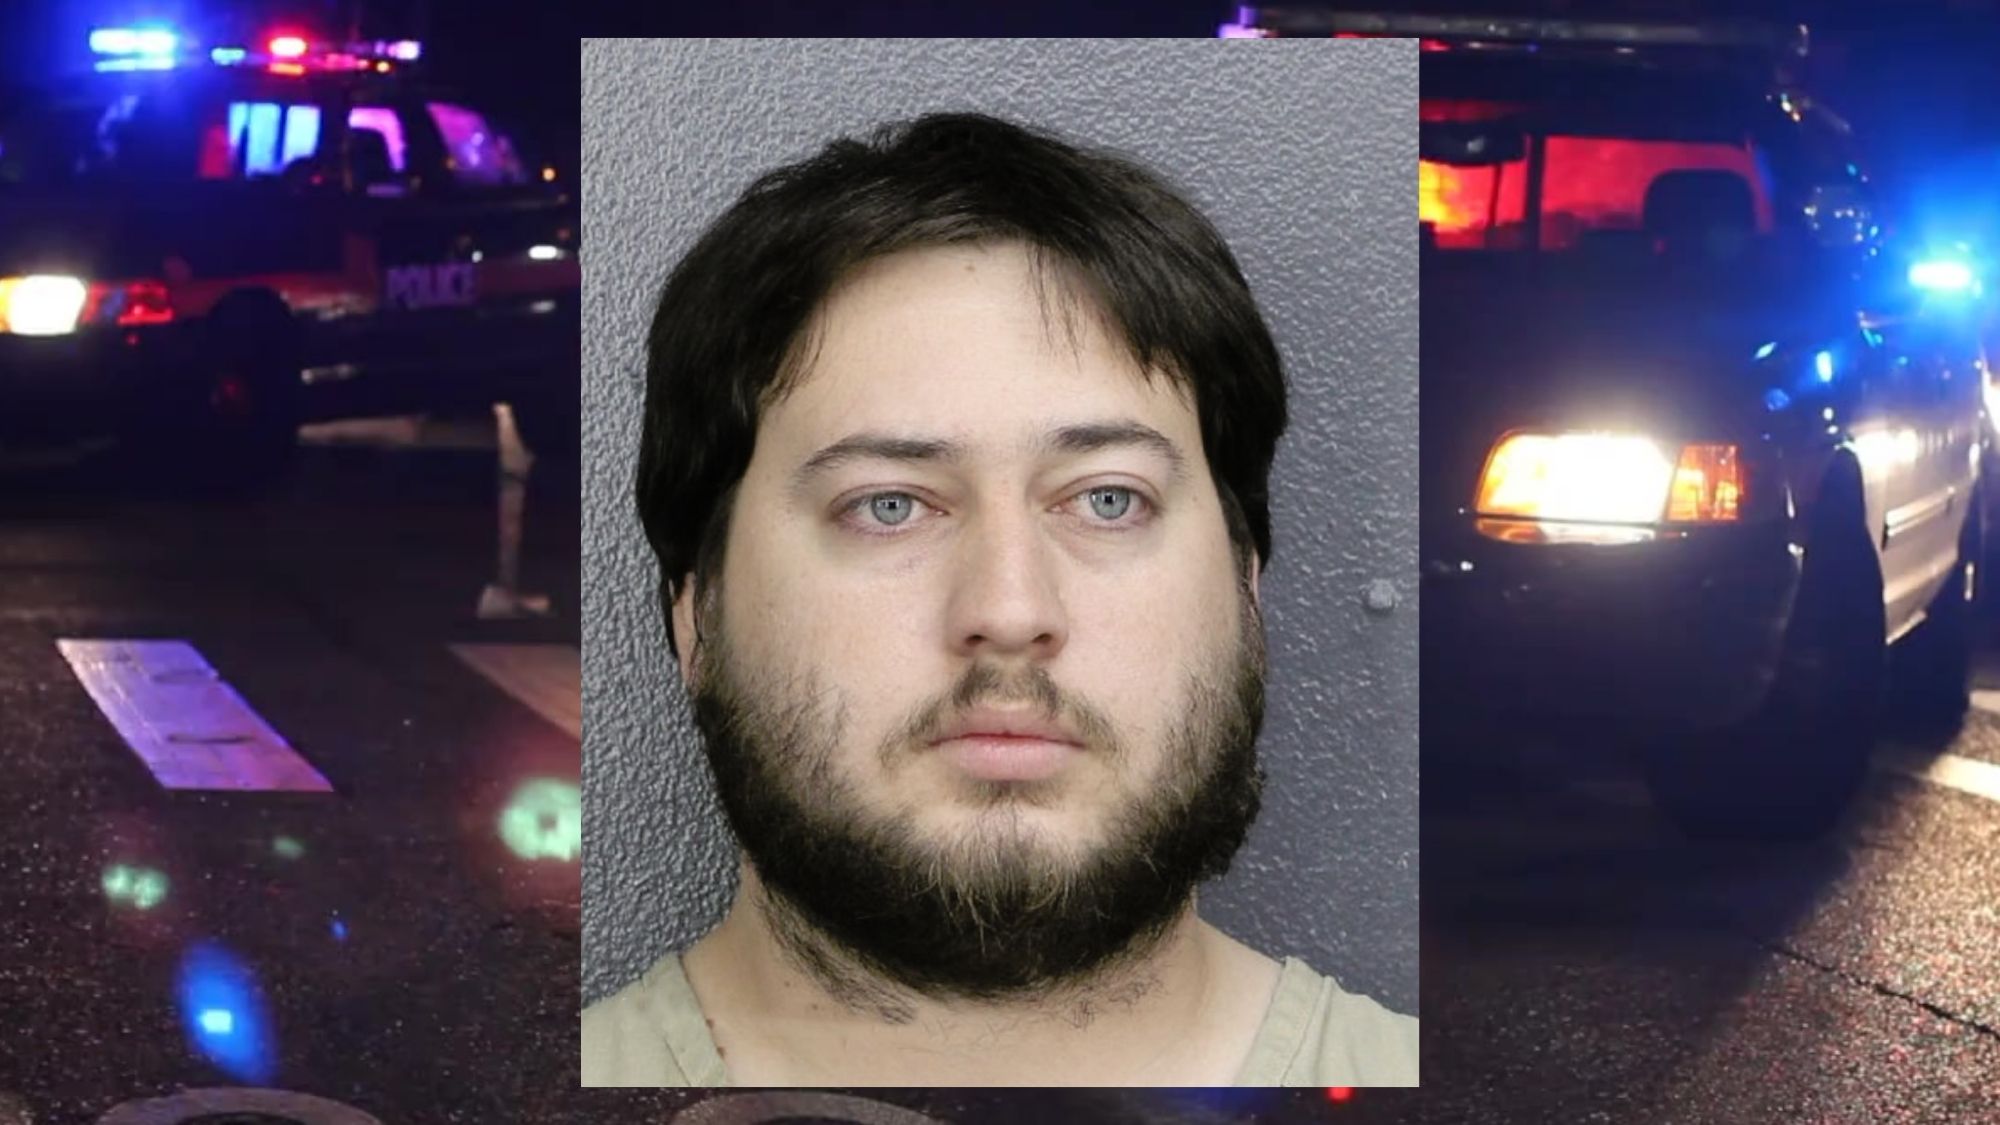 Coral Springs Undercover Sting Nets Felony Charges for Man 'Meeting Up' With 12-Year-Old